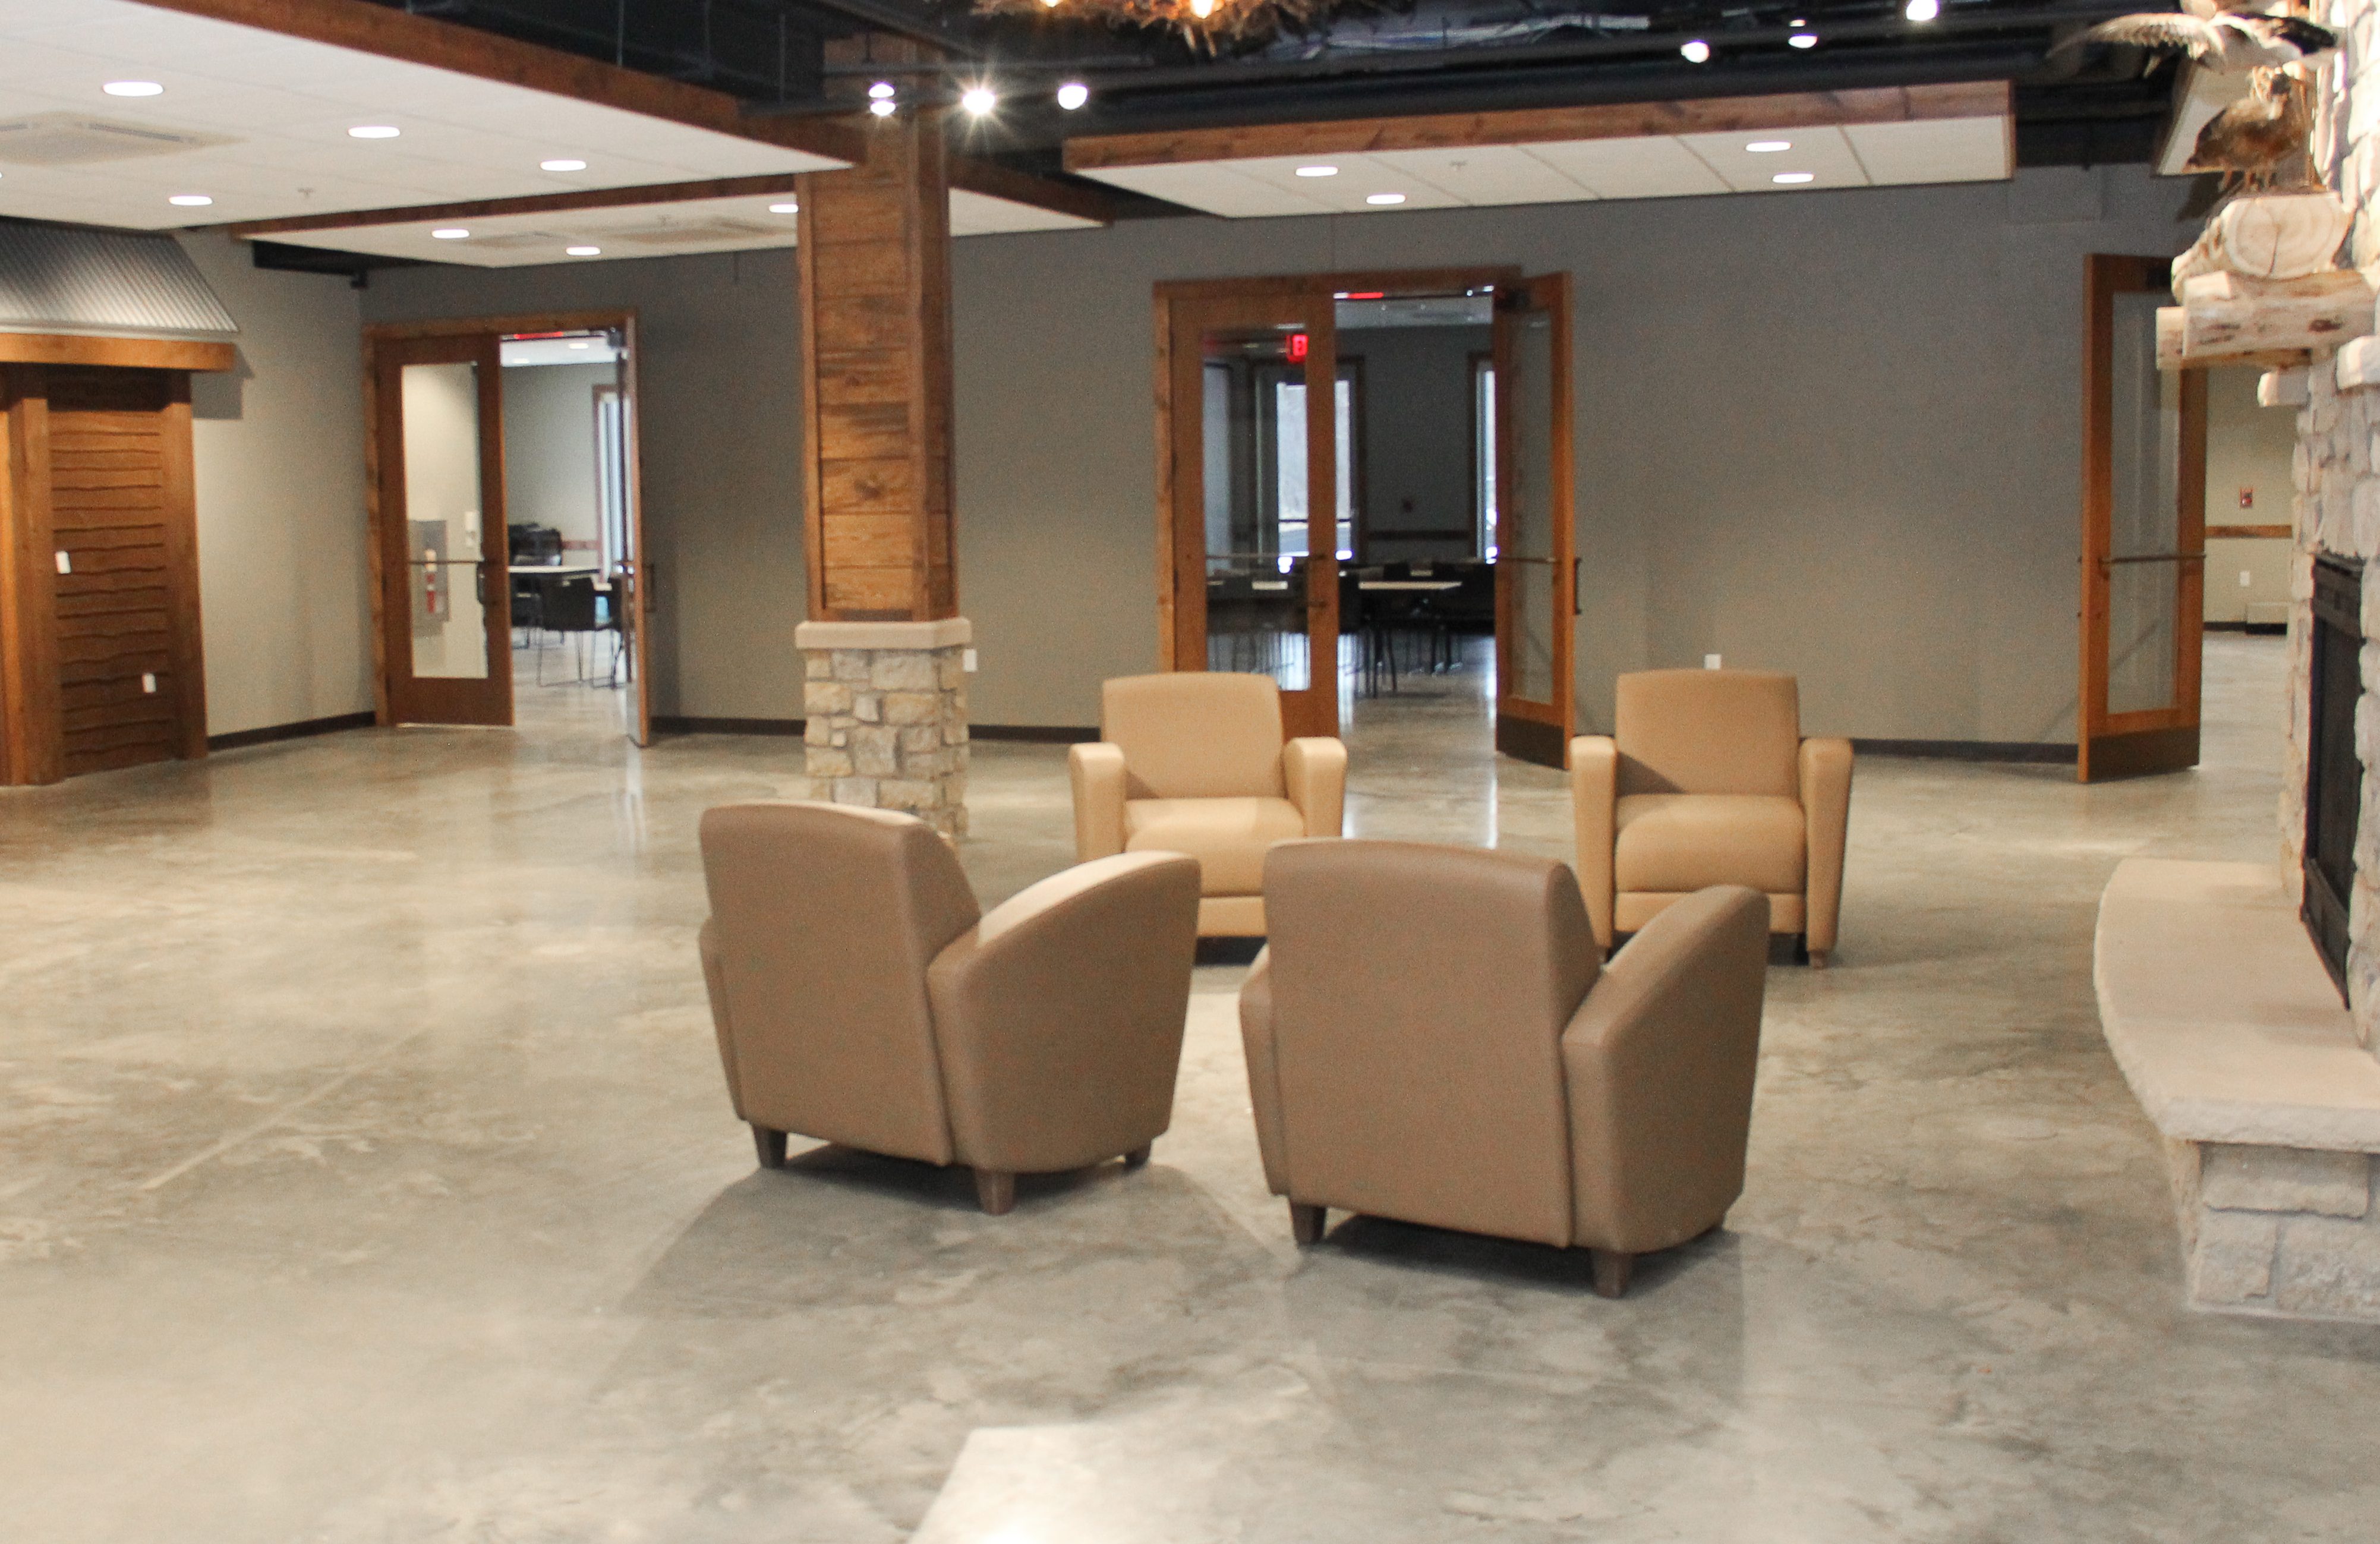 Polished Concrete has become a popular flooring choice for its superior durability, maintenance ease/cost and performance.